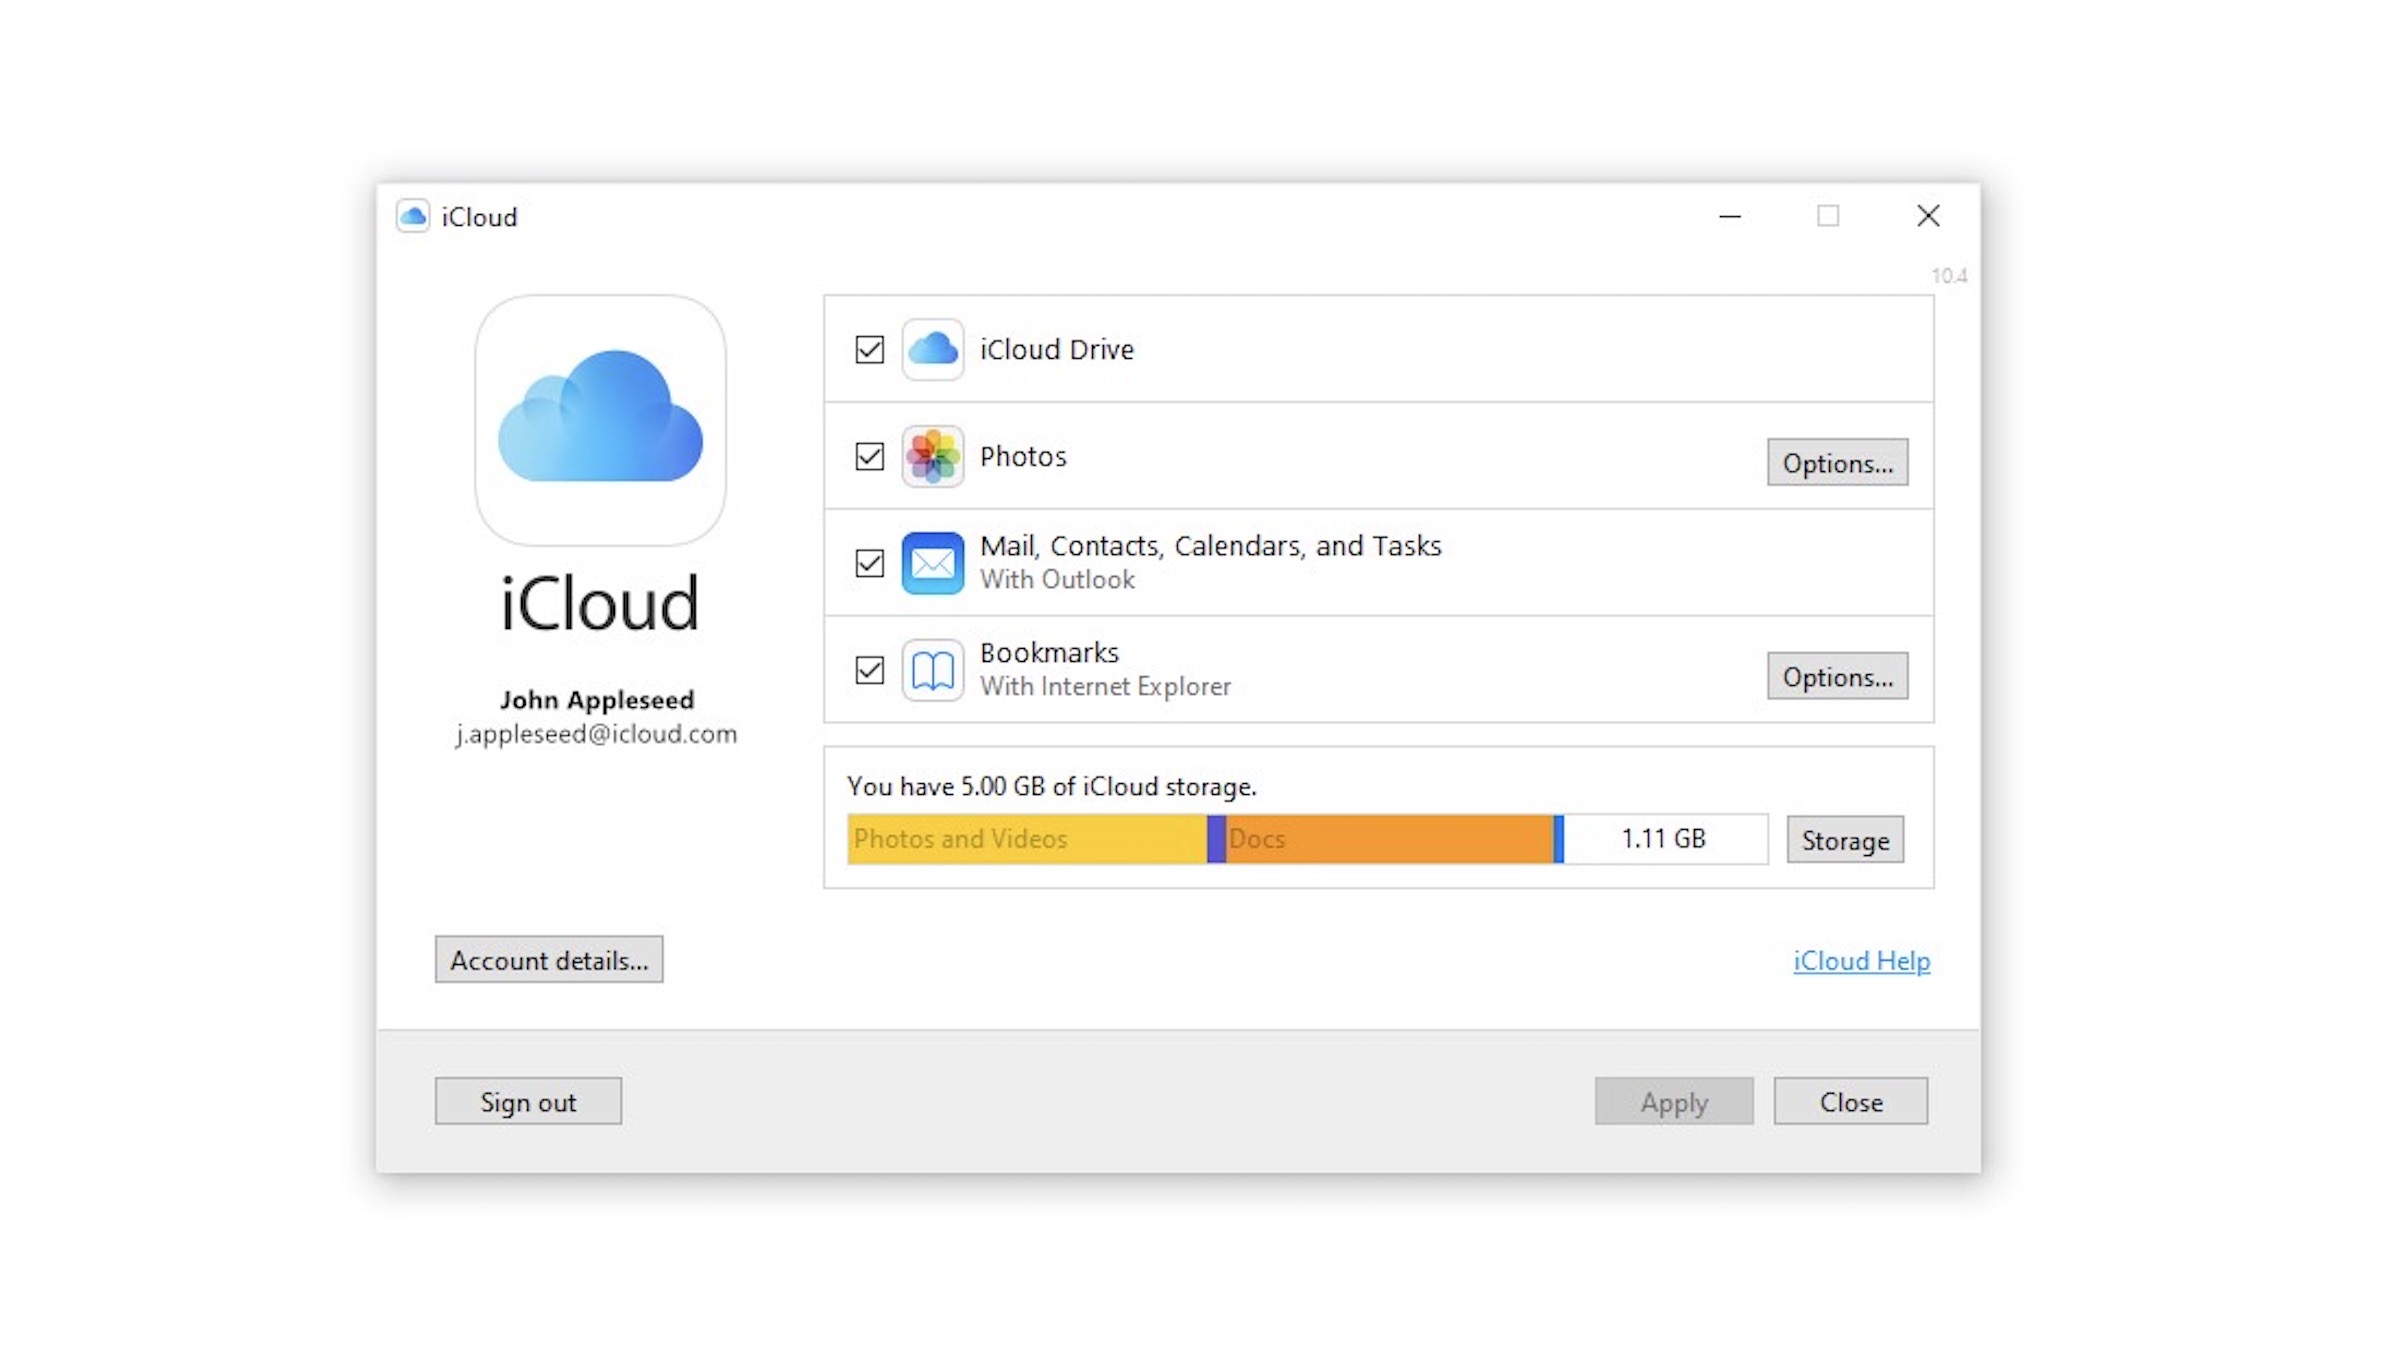 have windows 10 installed but icloud wont download